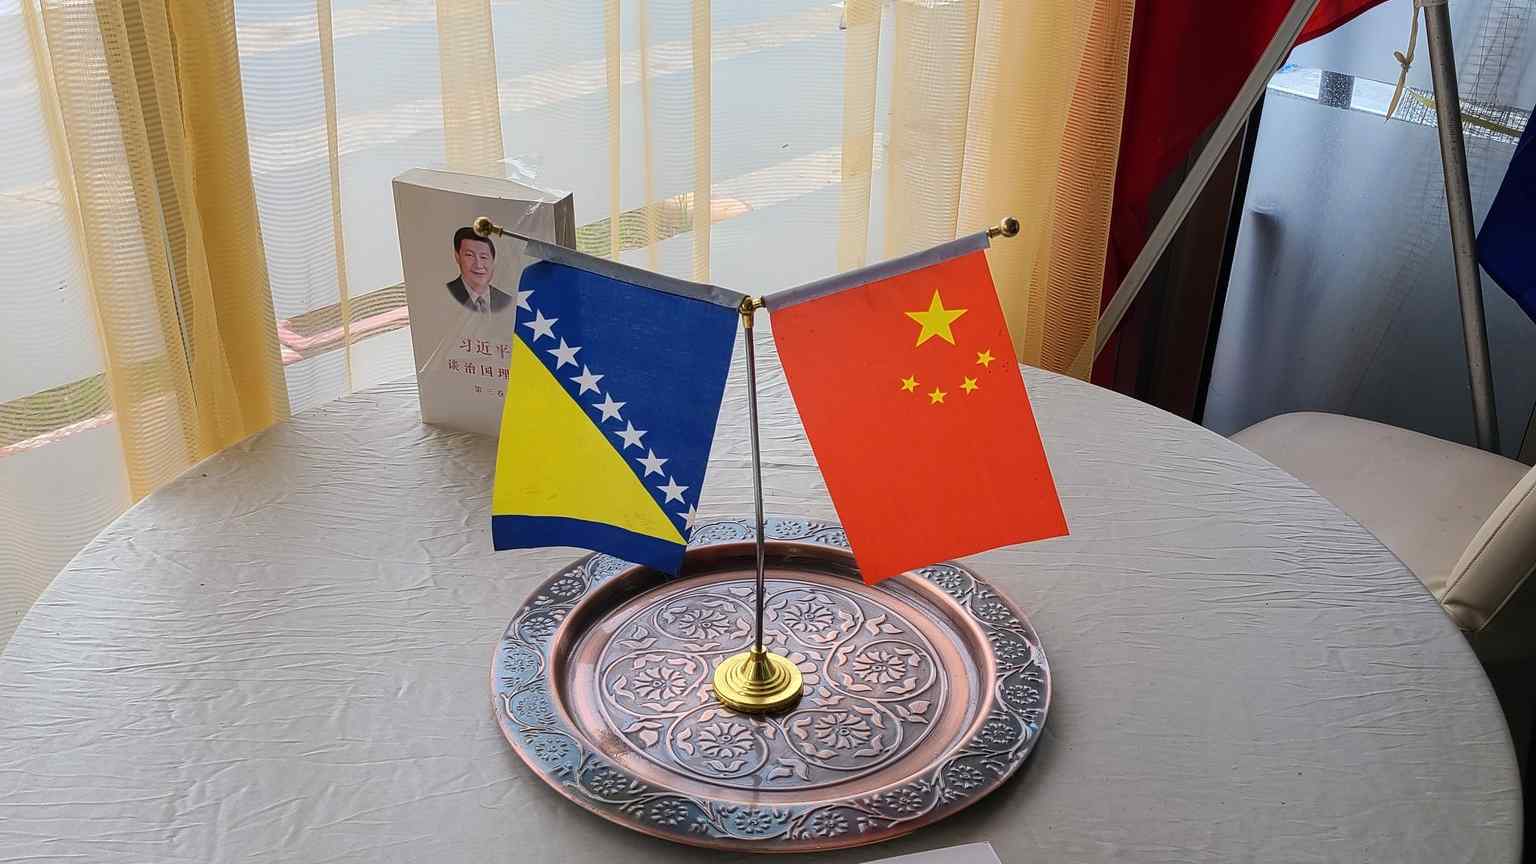 Photo: Bosnia and Herzegovina and the People's Republic of China's flags in a cafe in Bosnia and Herzegovina. Credit: Masha Borak, Twitter, August 27, 2022.